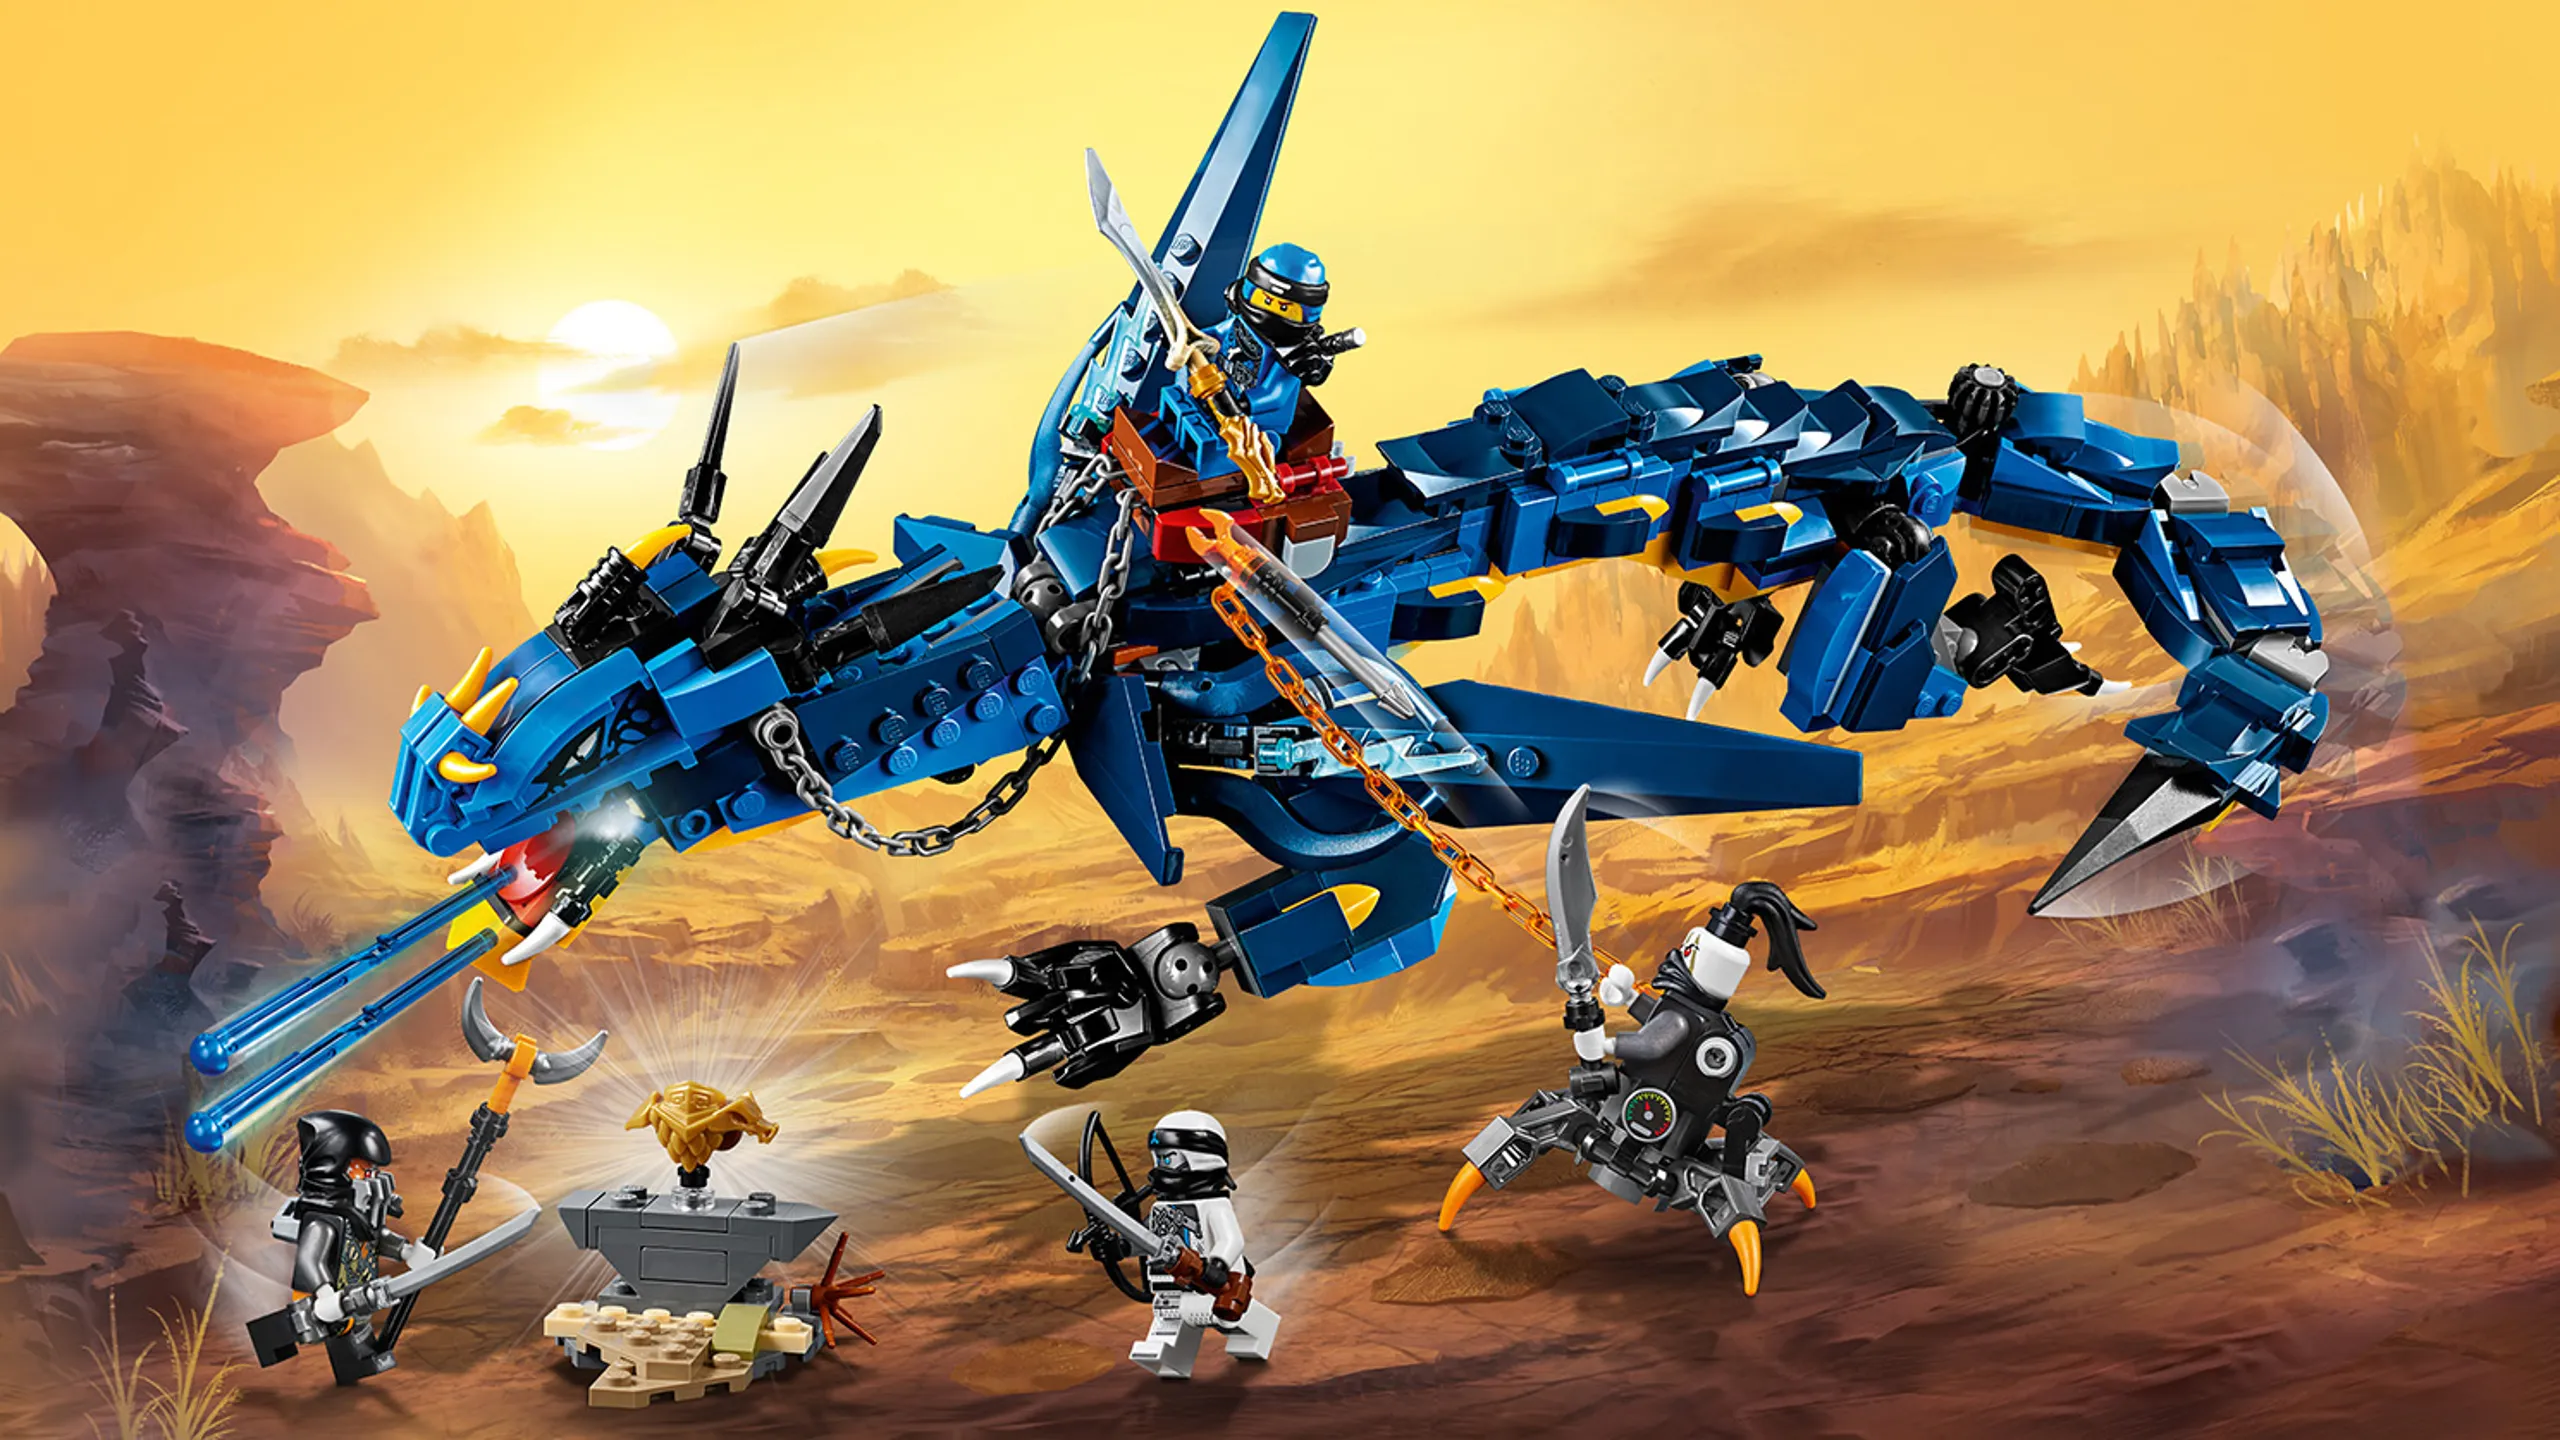 LEGO Ninjago - 70652 Stormbringer - Ride this Lightning Dragon with Jay and fire lightning bolts at the evil guys Daddy No Legs and Muzzle.